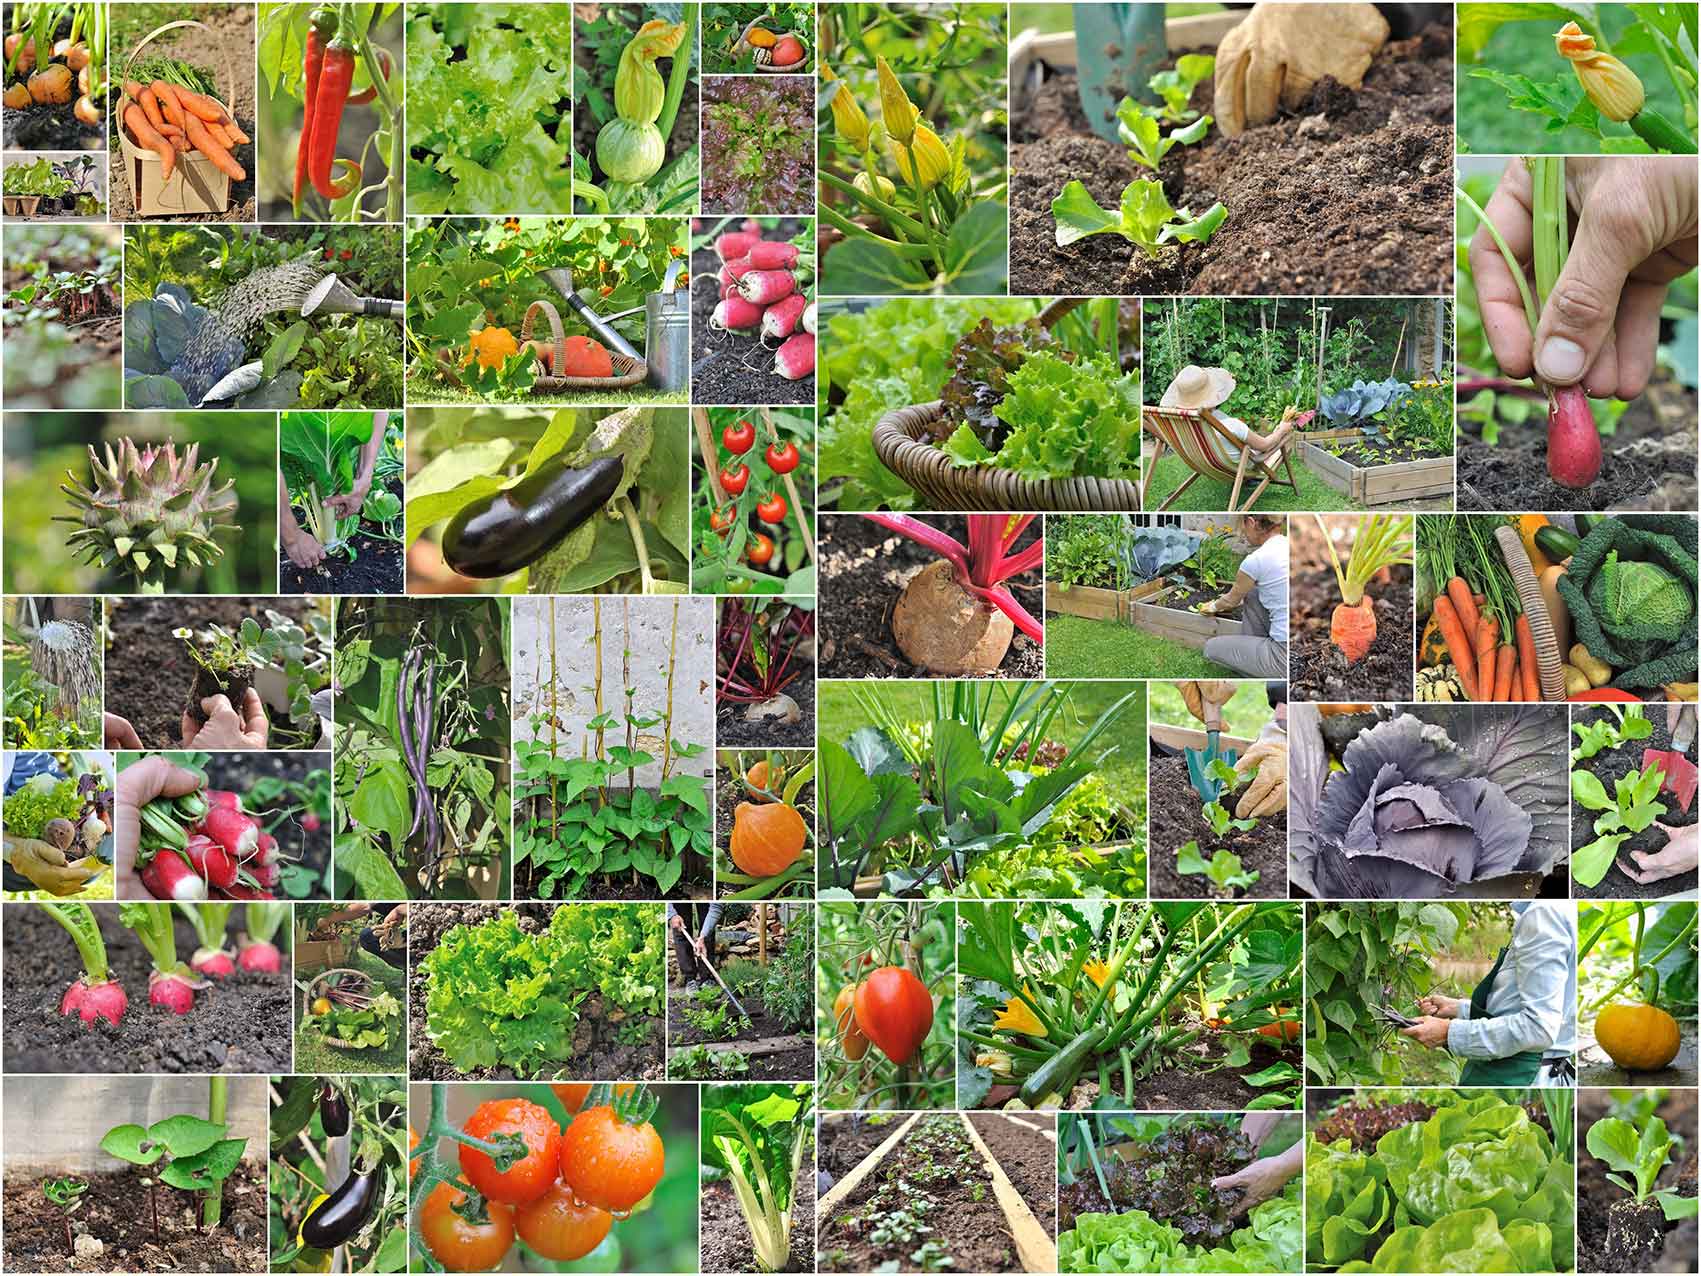 A collage image of various fruit and vegetables being grown in a vegeable garden.